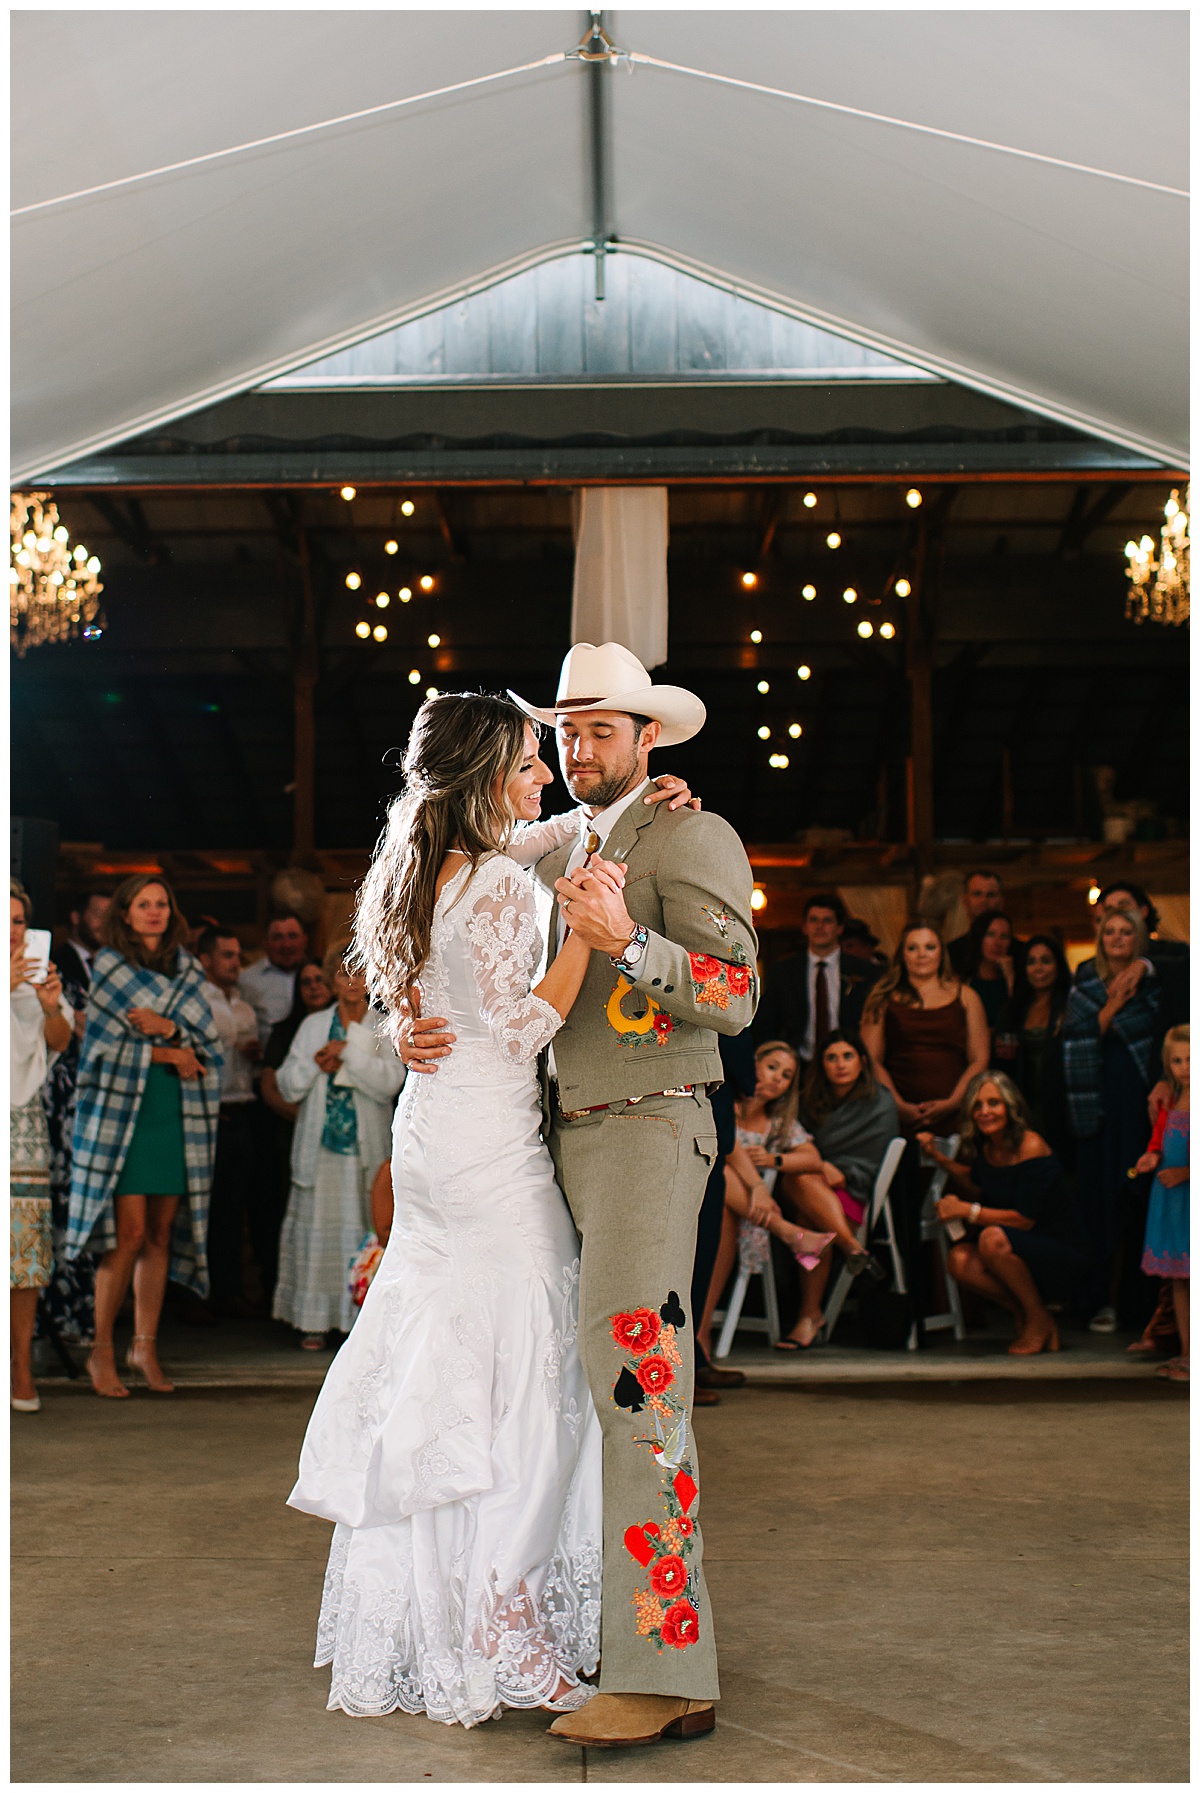 Man and woman dance together for Michigan Wedding Photographer